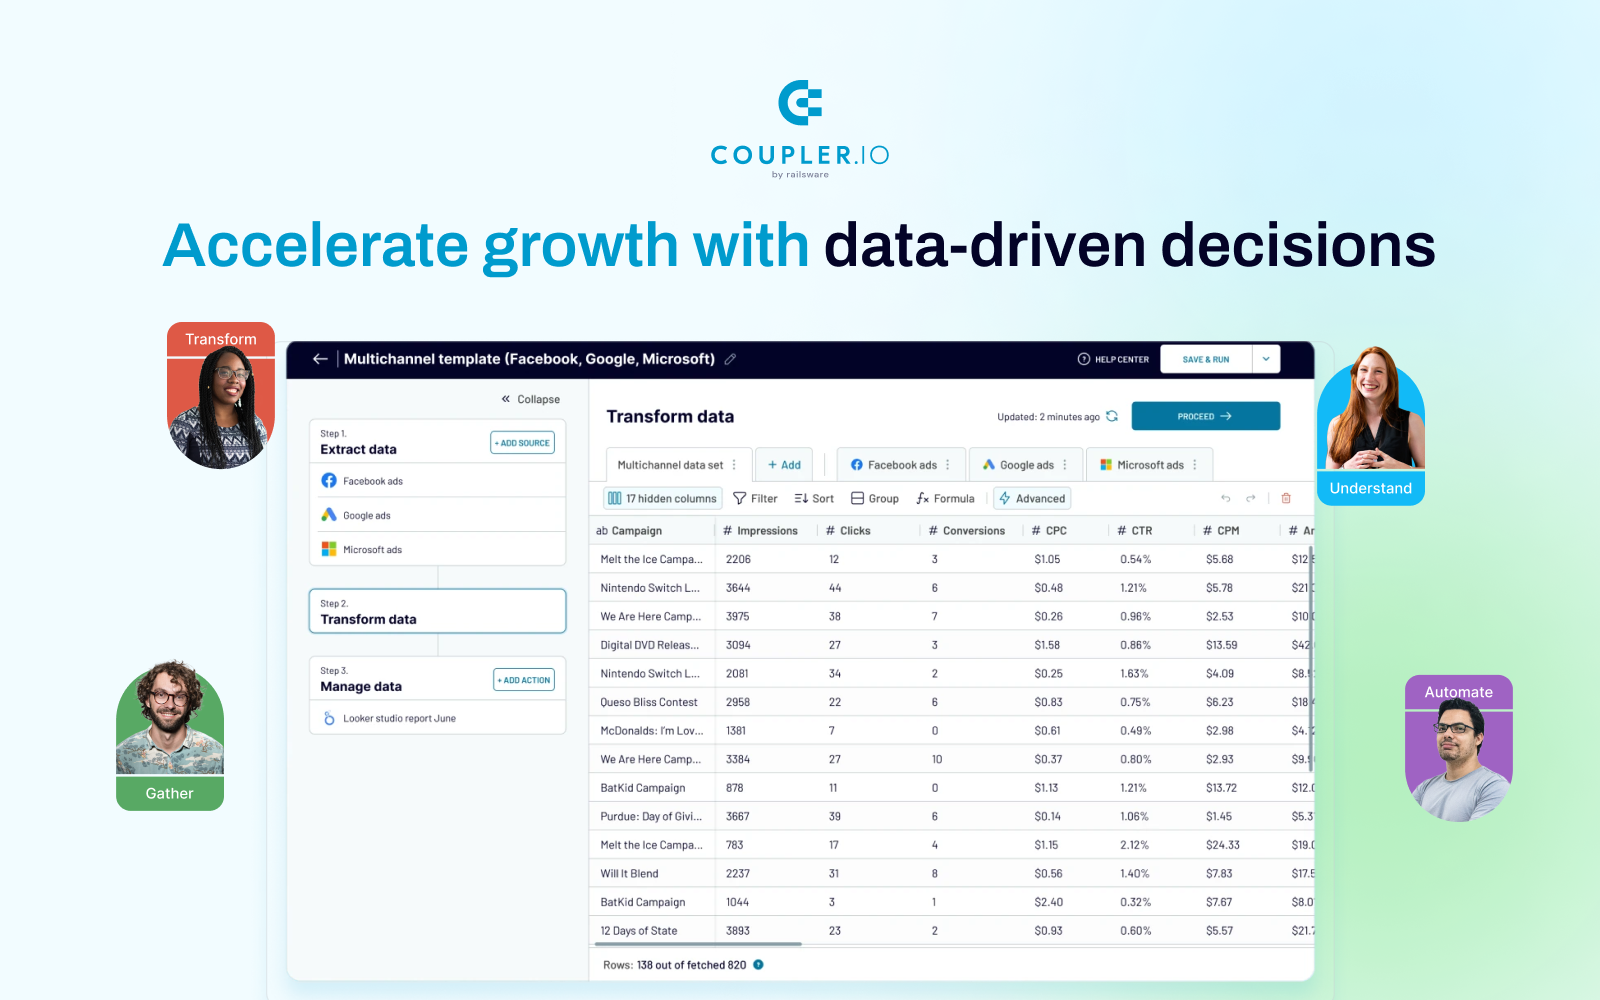 Accelerate growth with data-driven decisions